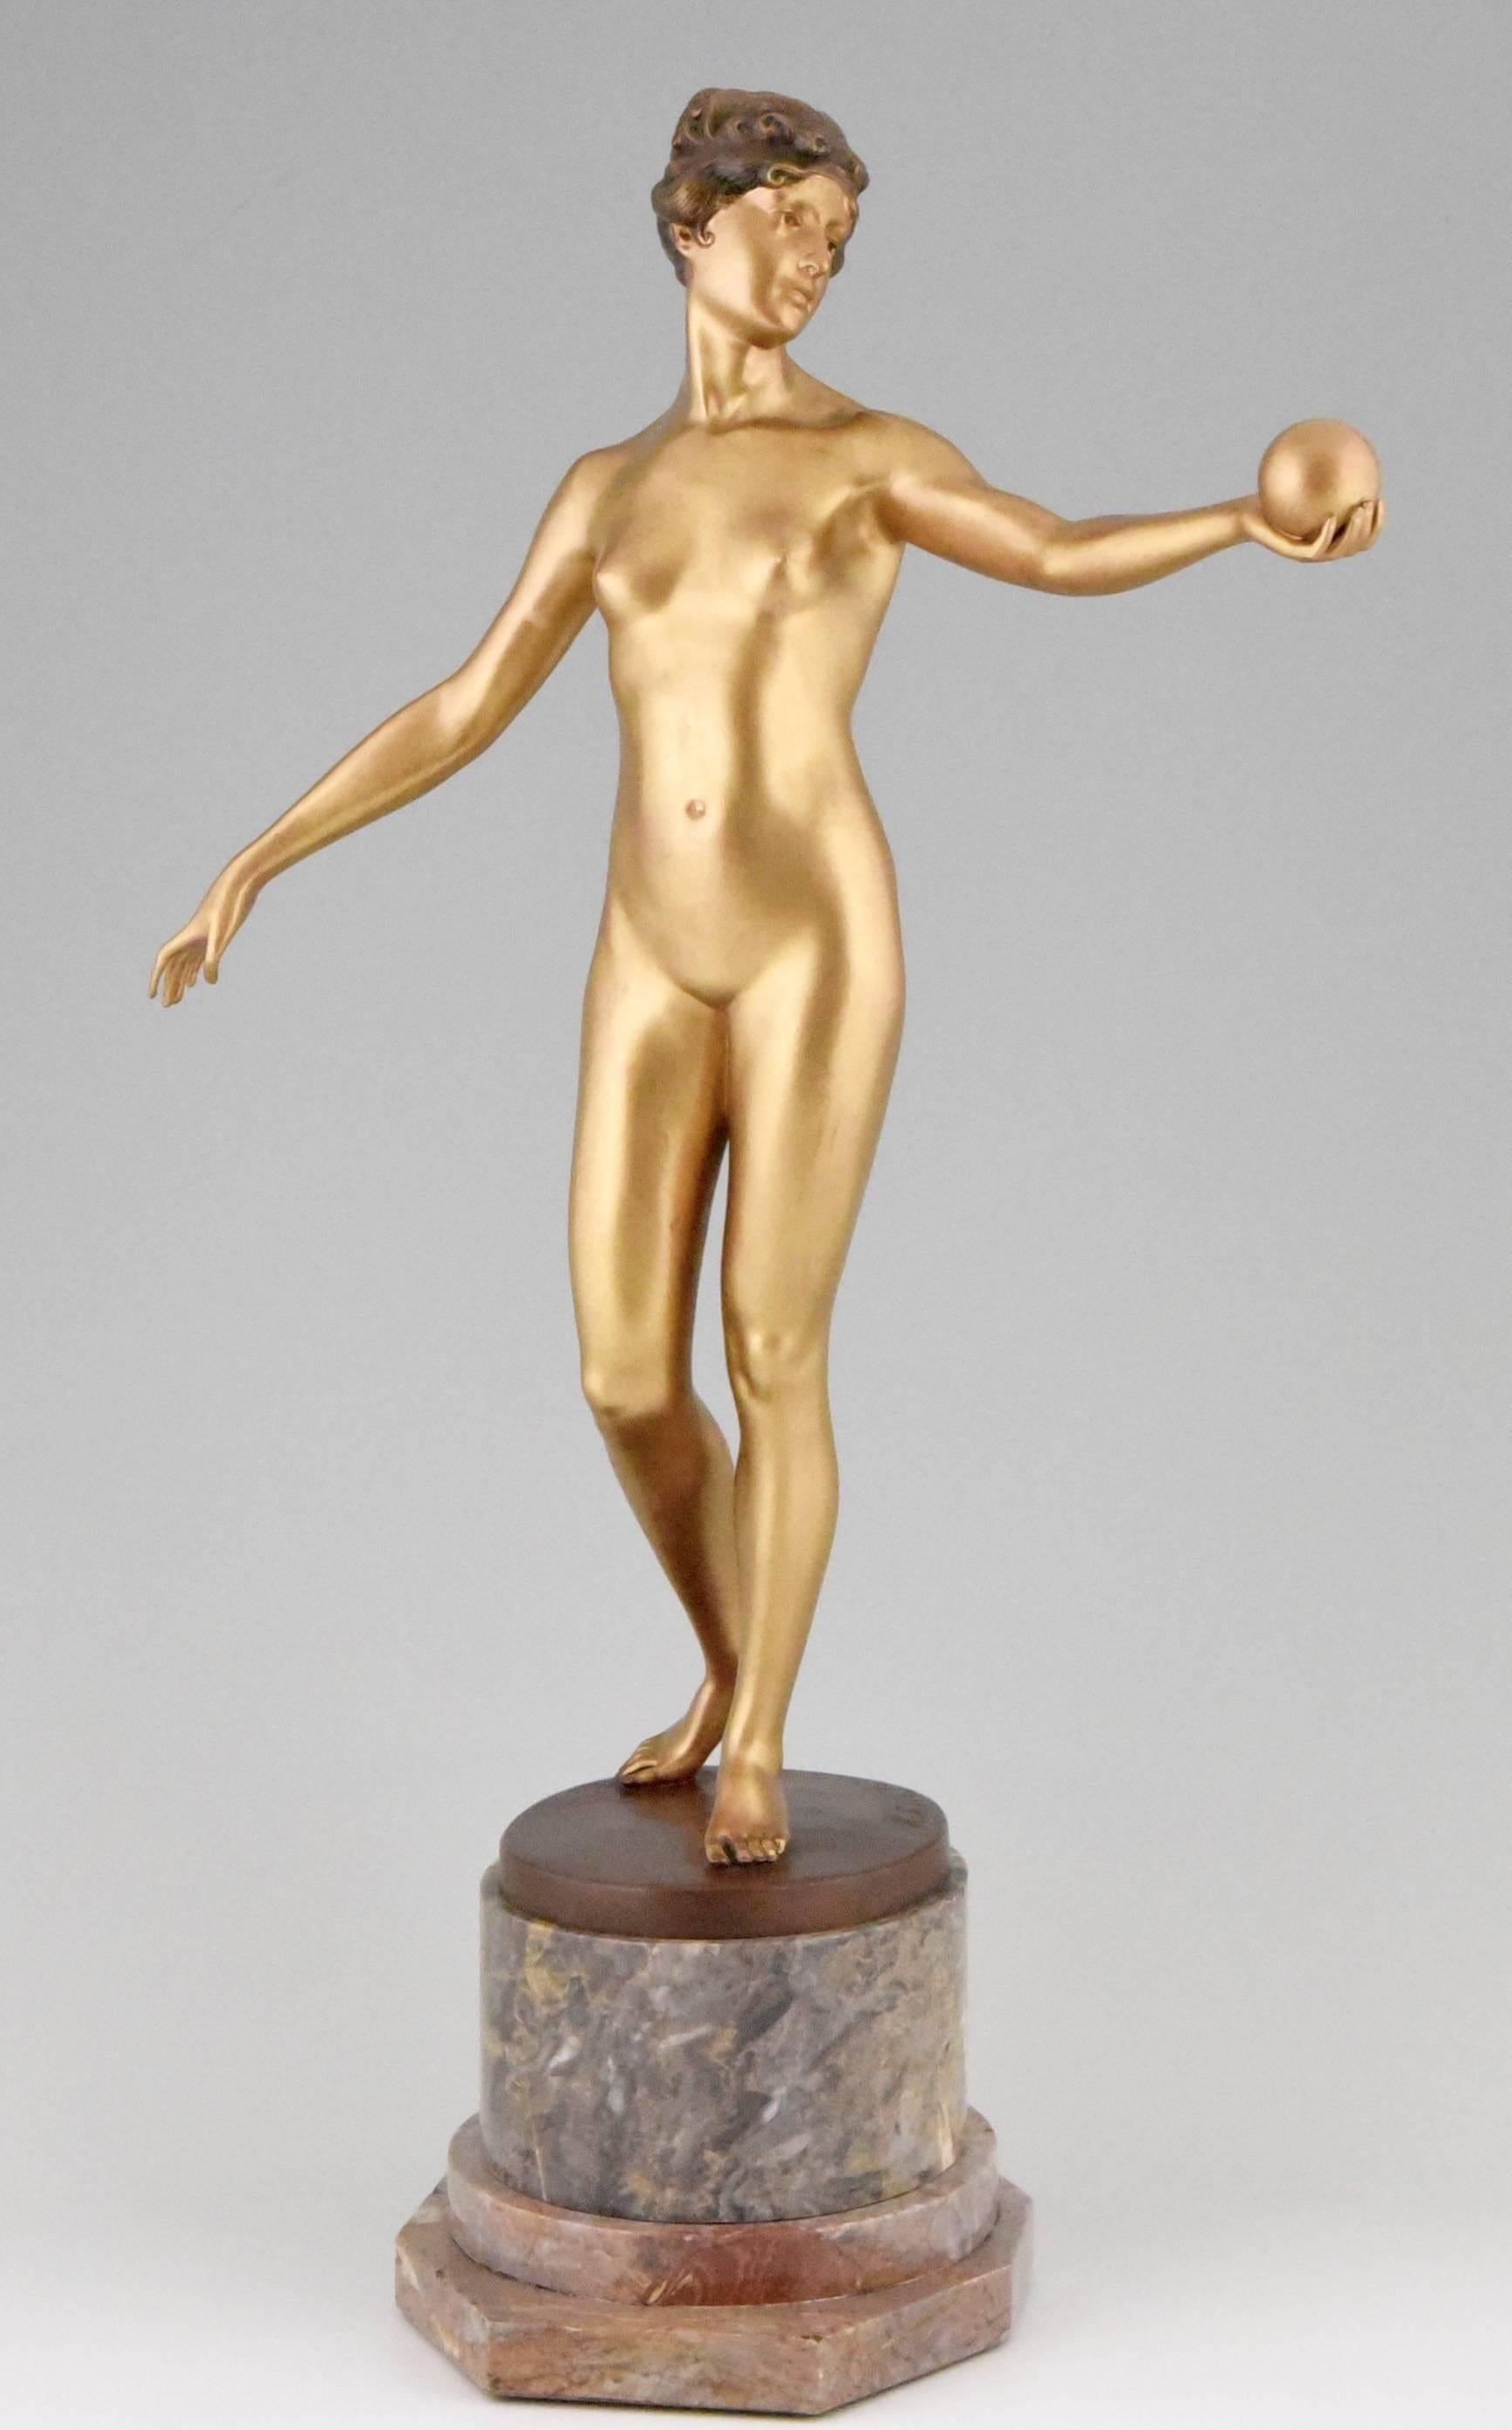 Art Nouveau bronze by Hans Keck.

 Literature:  “Bronzes, sculptors and founders” by H. Berman, Abage.  “Art deco and other figures” by Brian Catley, Antique collectors club.  “Art deco sculpture” by Victor Arwas, Academy.